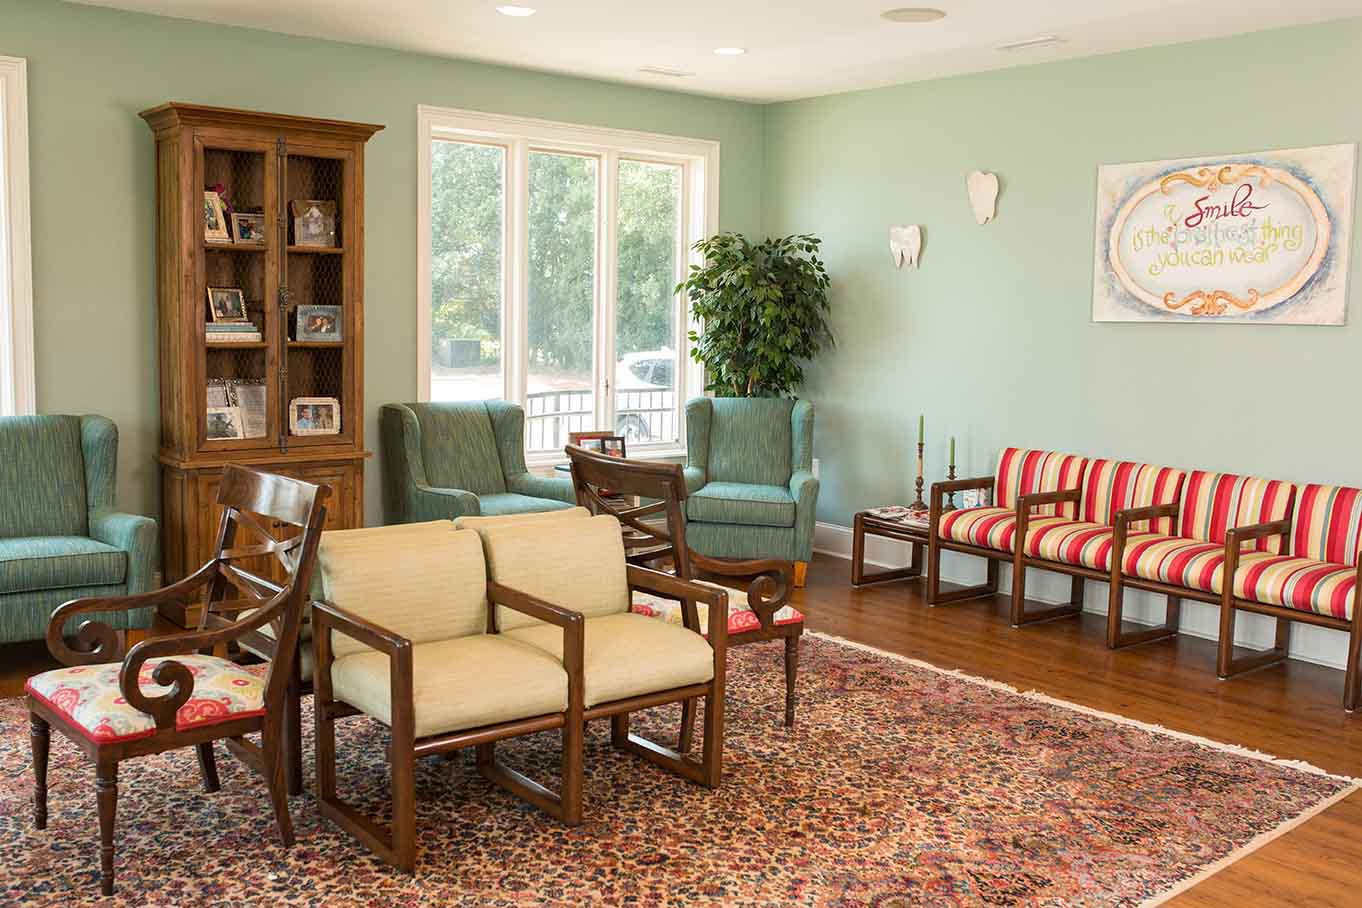 Walters & Smith Family Dentistry waiting area with comfortable chairs and couchces.